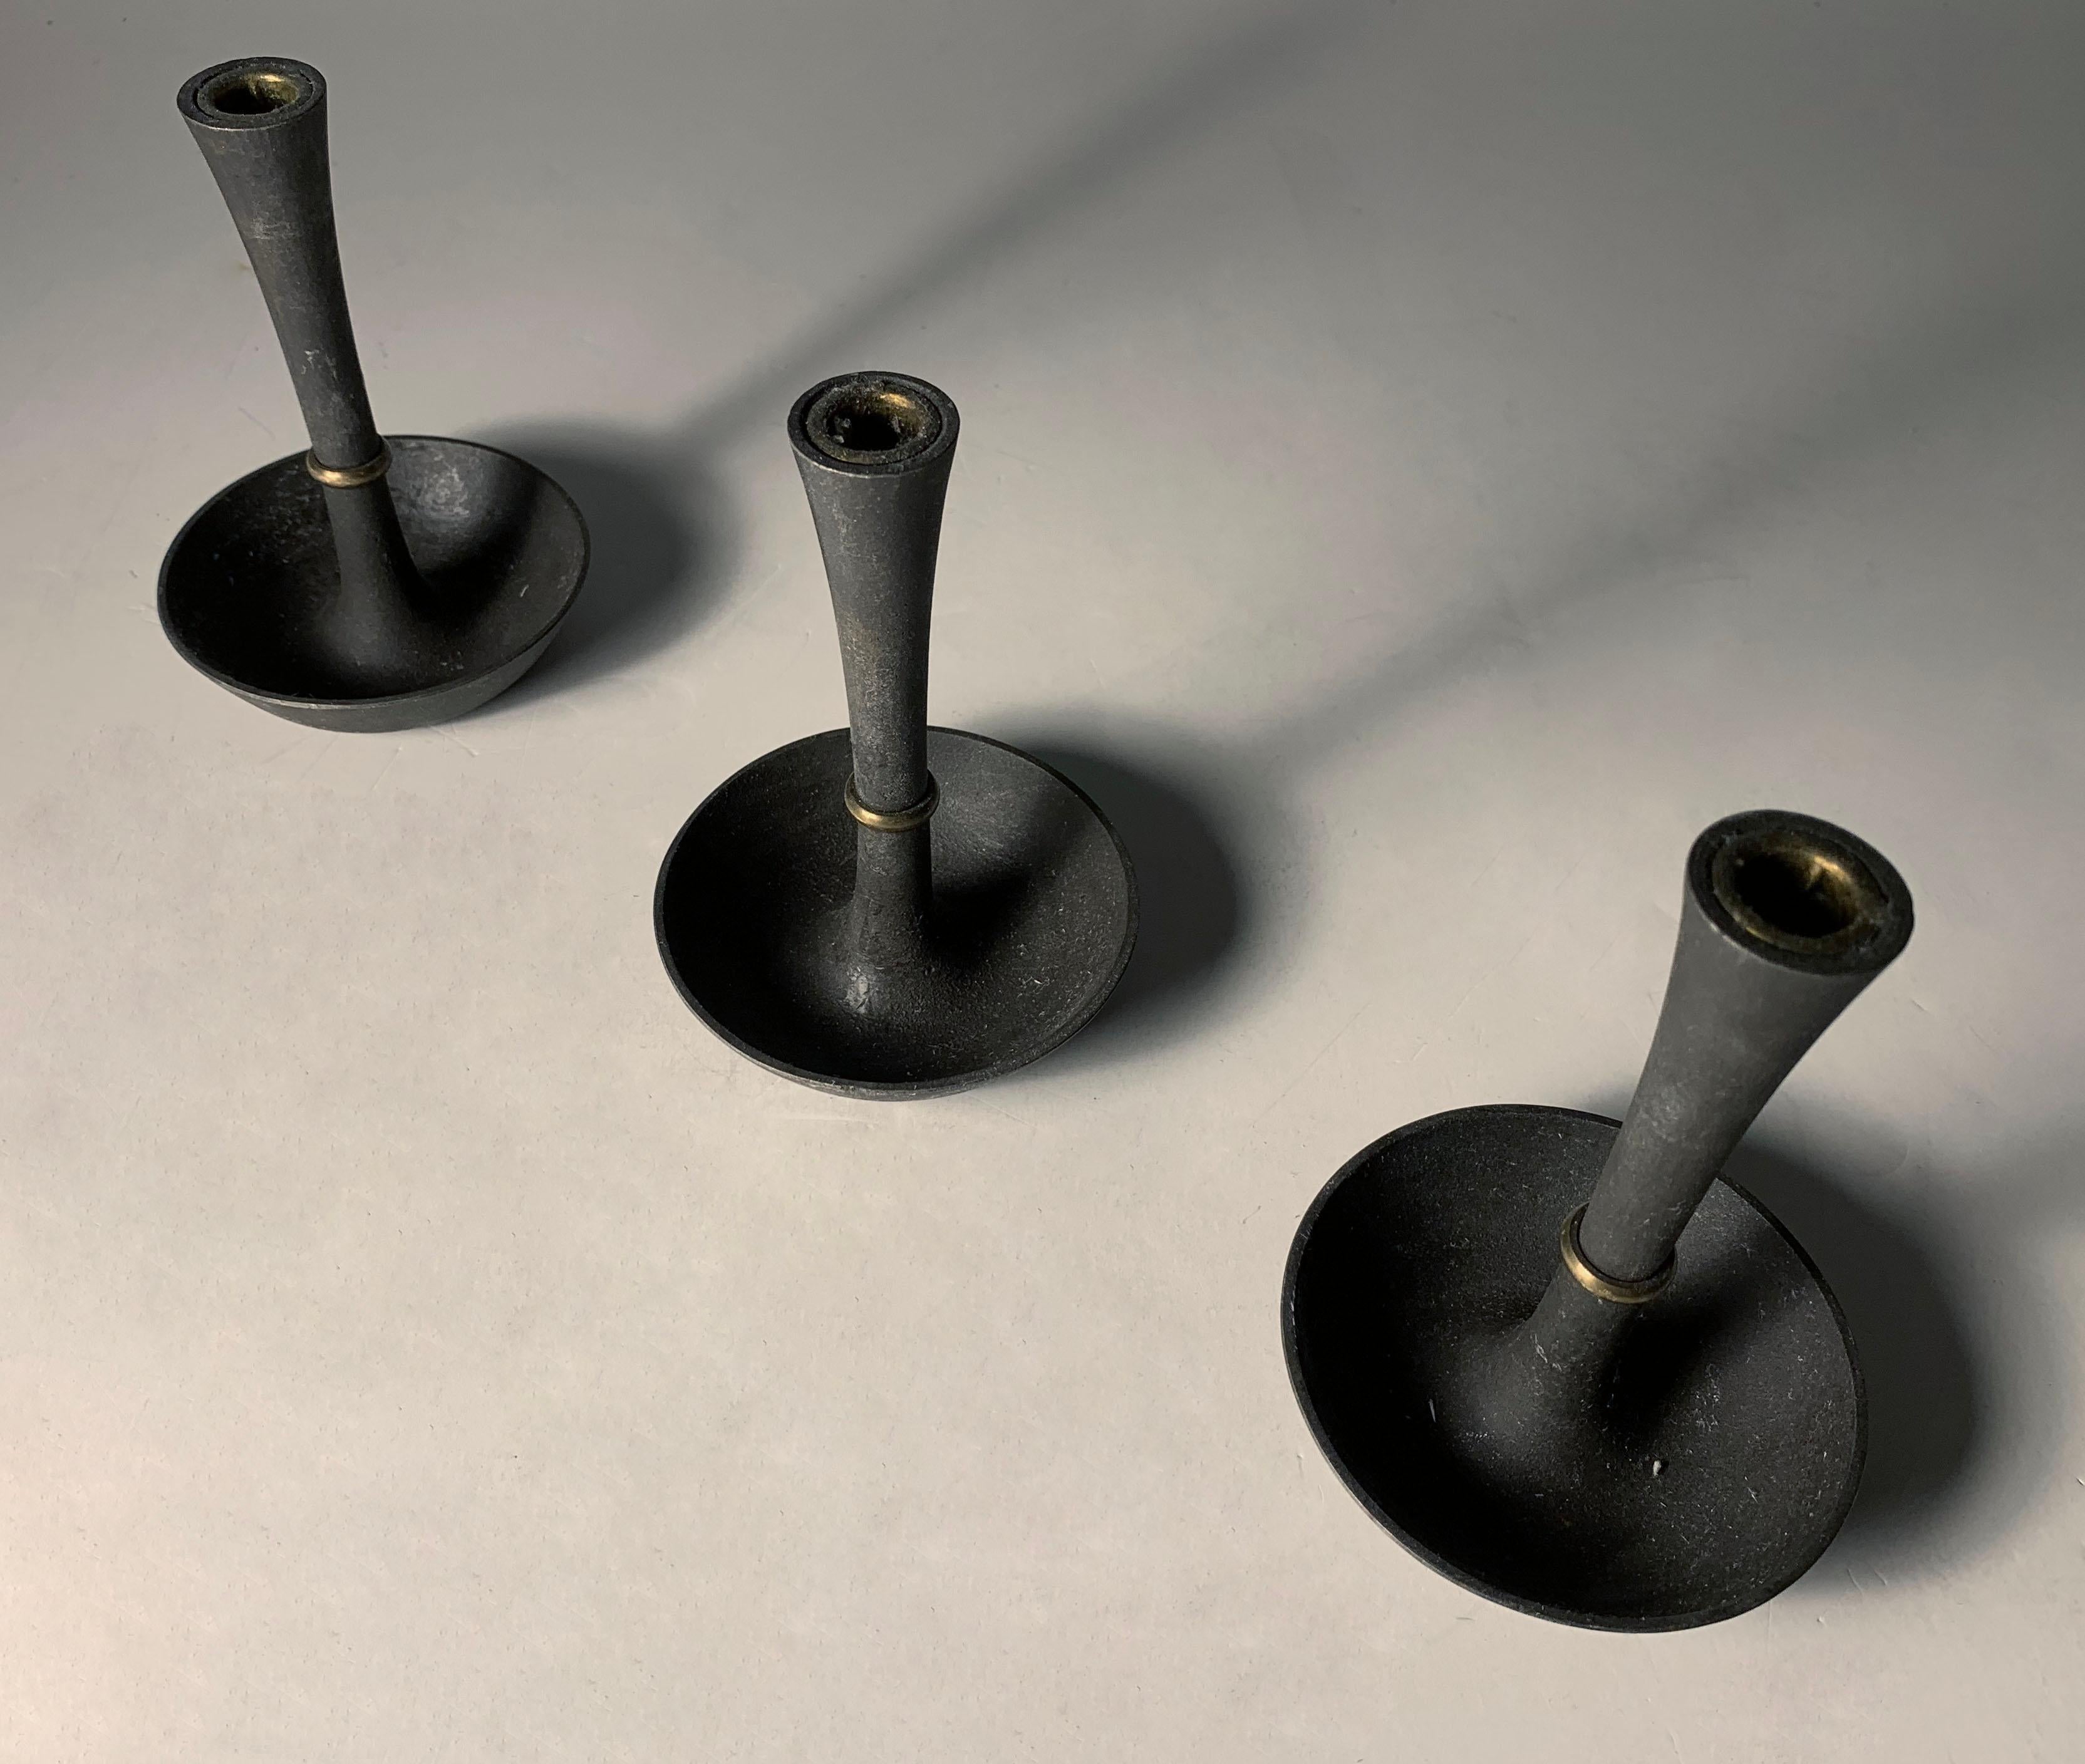 Danish Dansk Iron and Brass Candle Holders by Jens Quistgaard